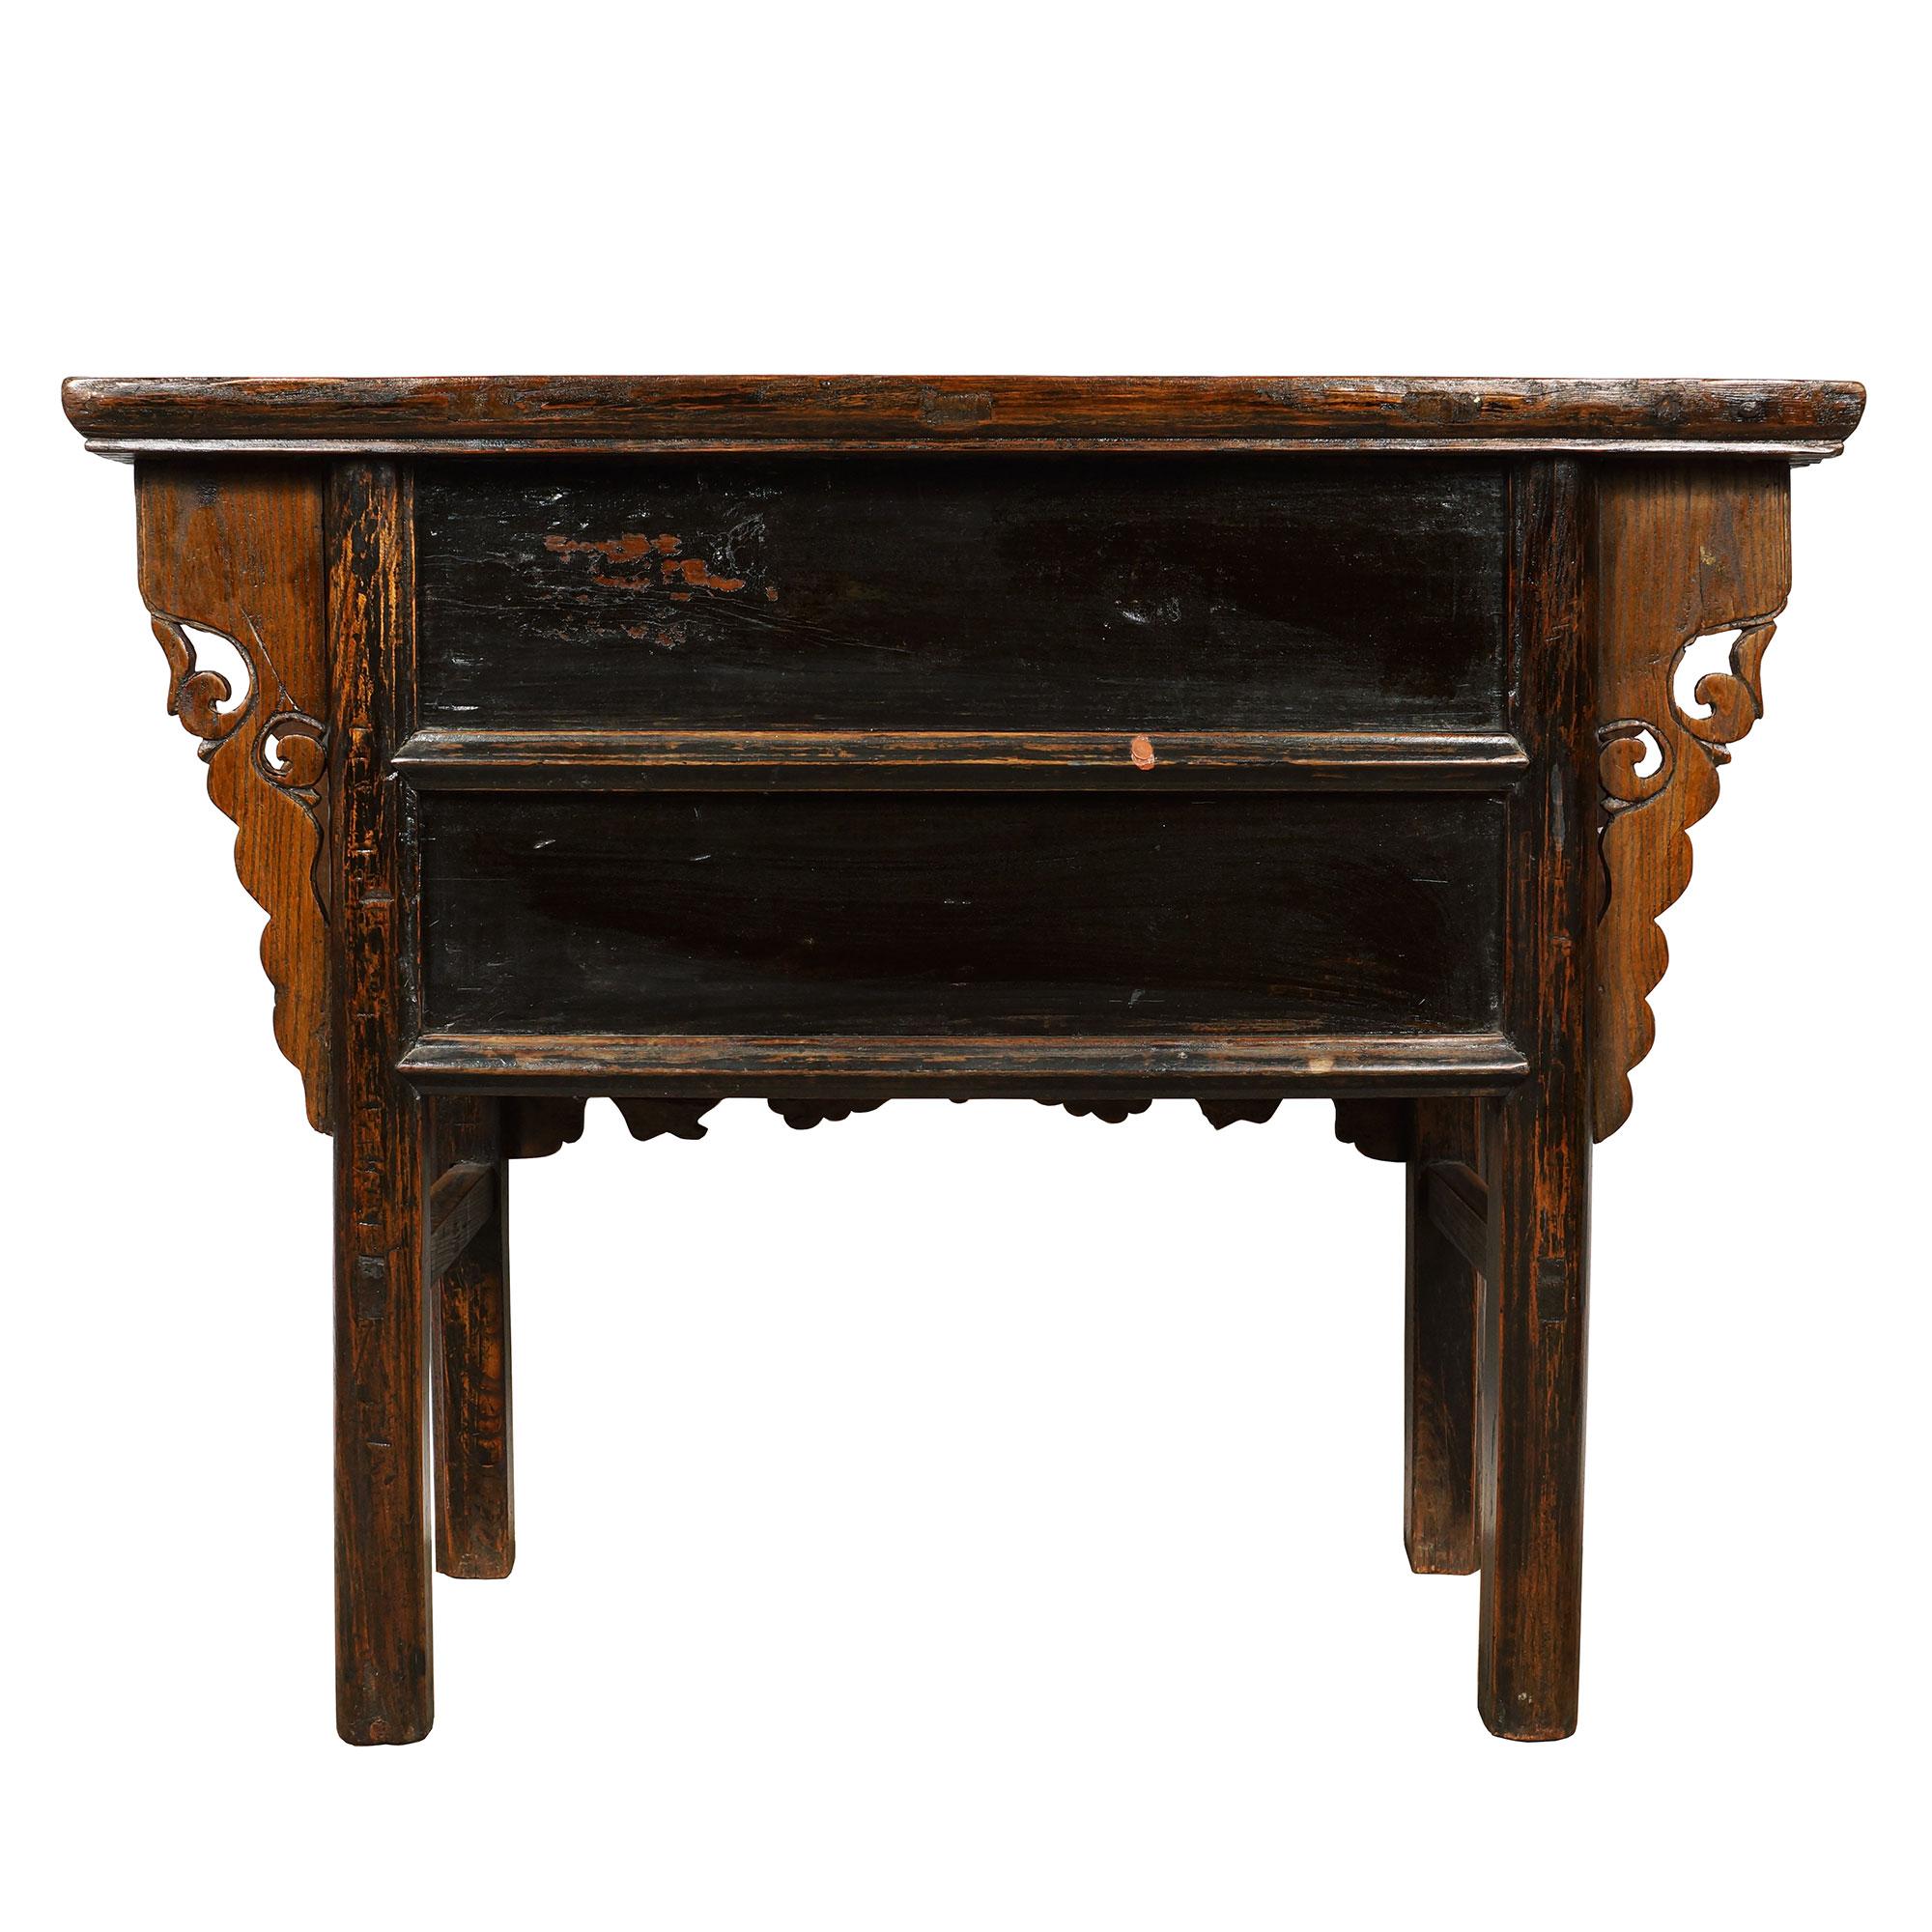 19th Century Antique Chinese Massive Carved Shan xi Console Table/Sideboard For Sale 6